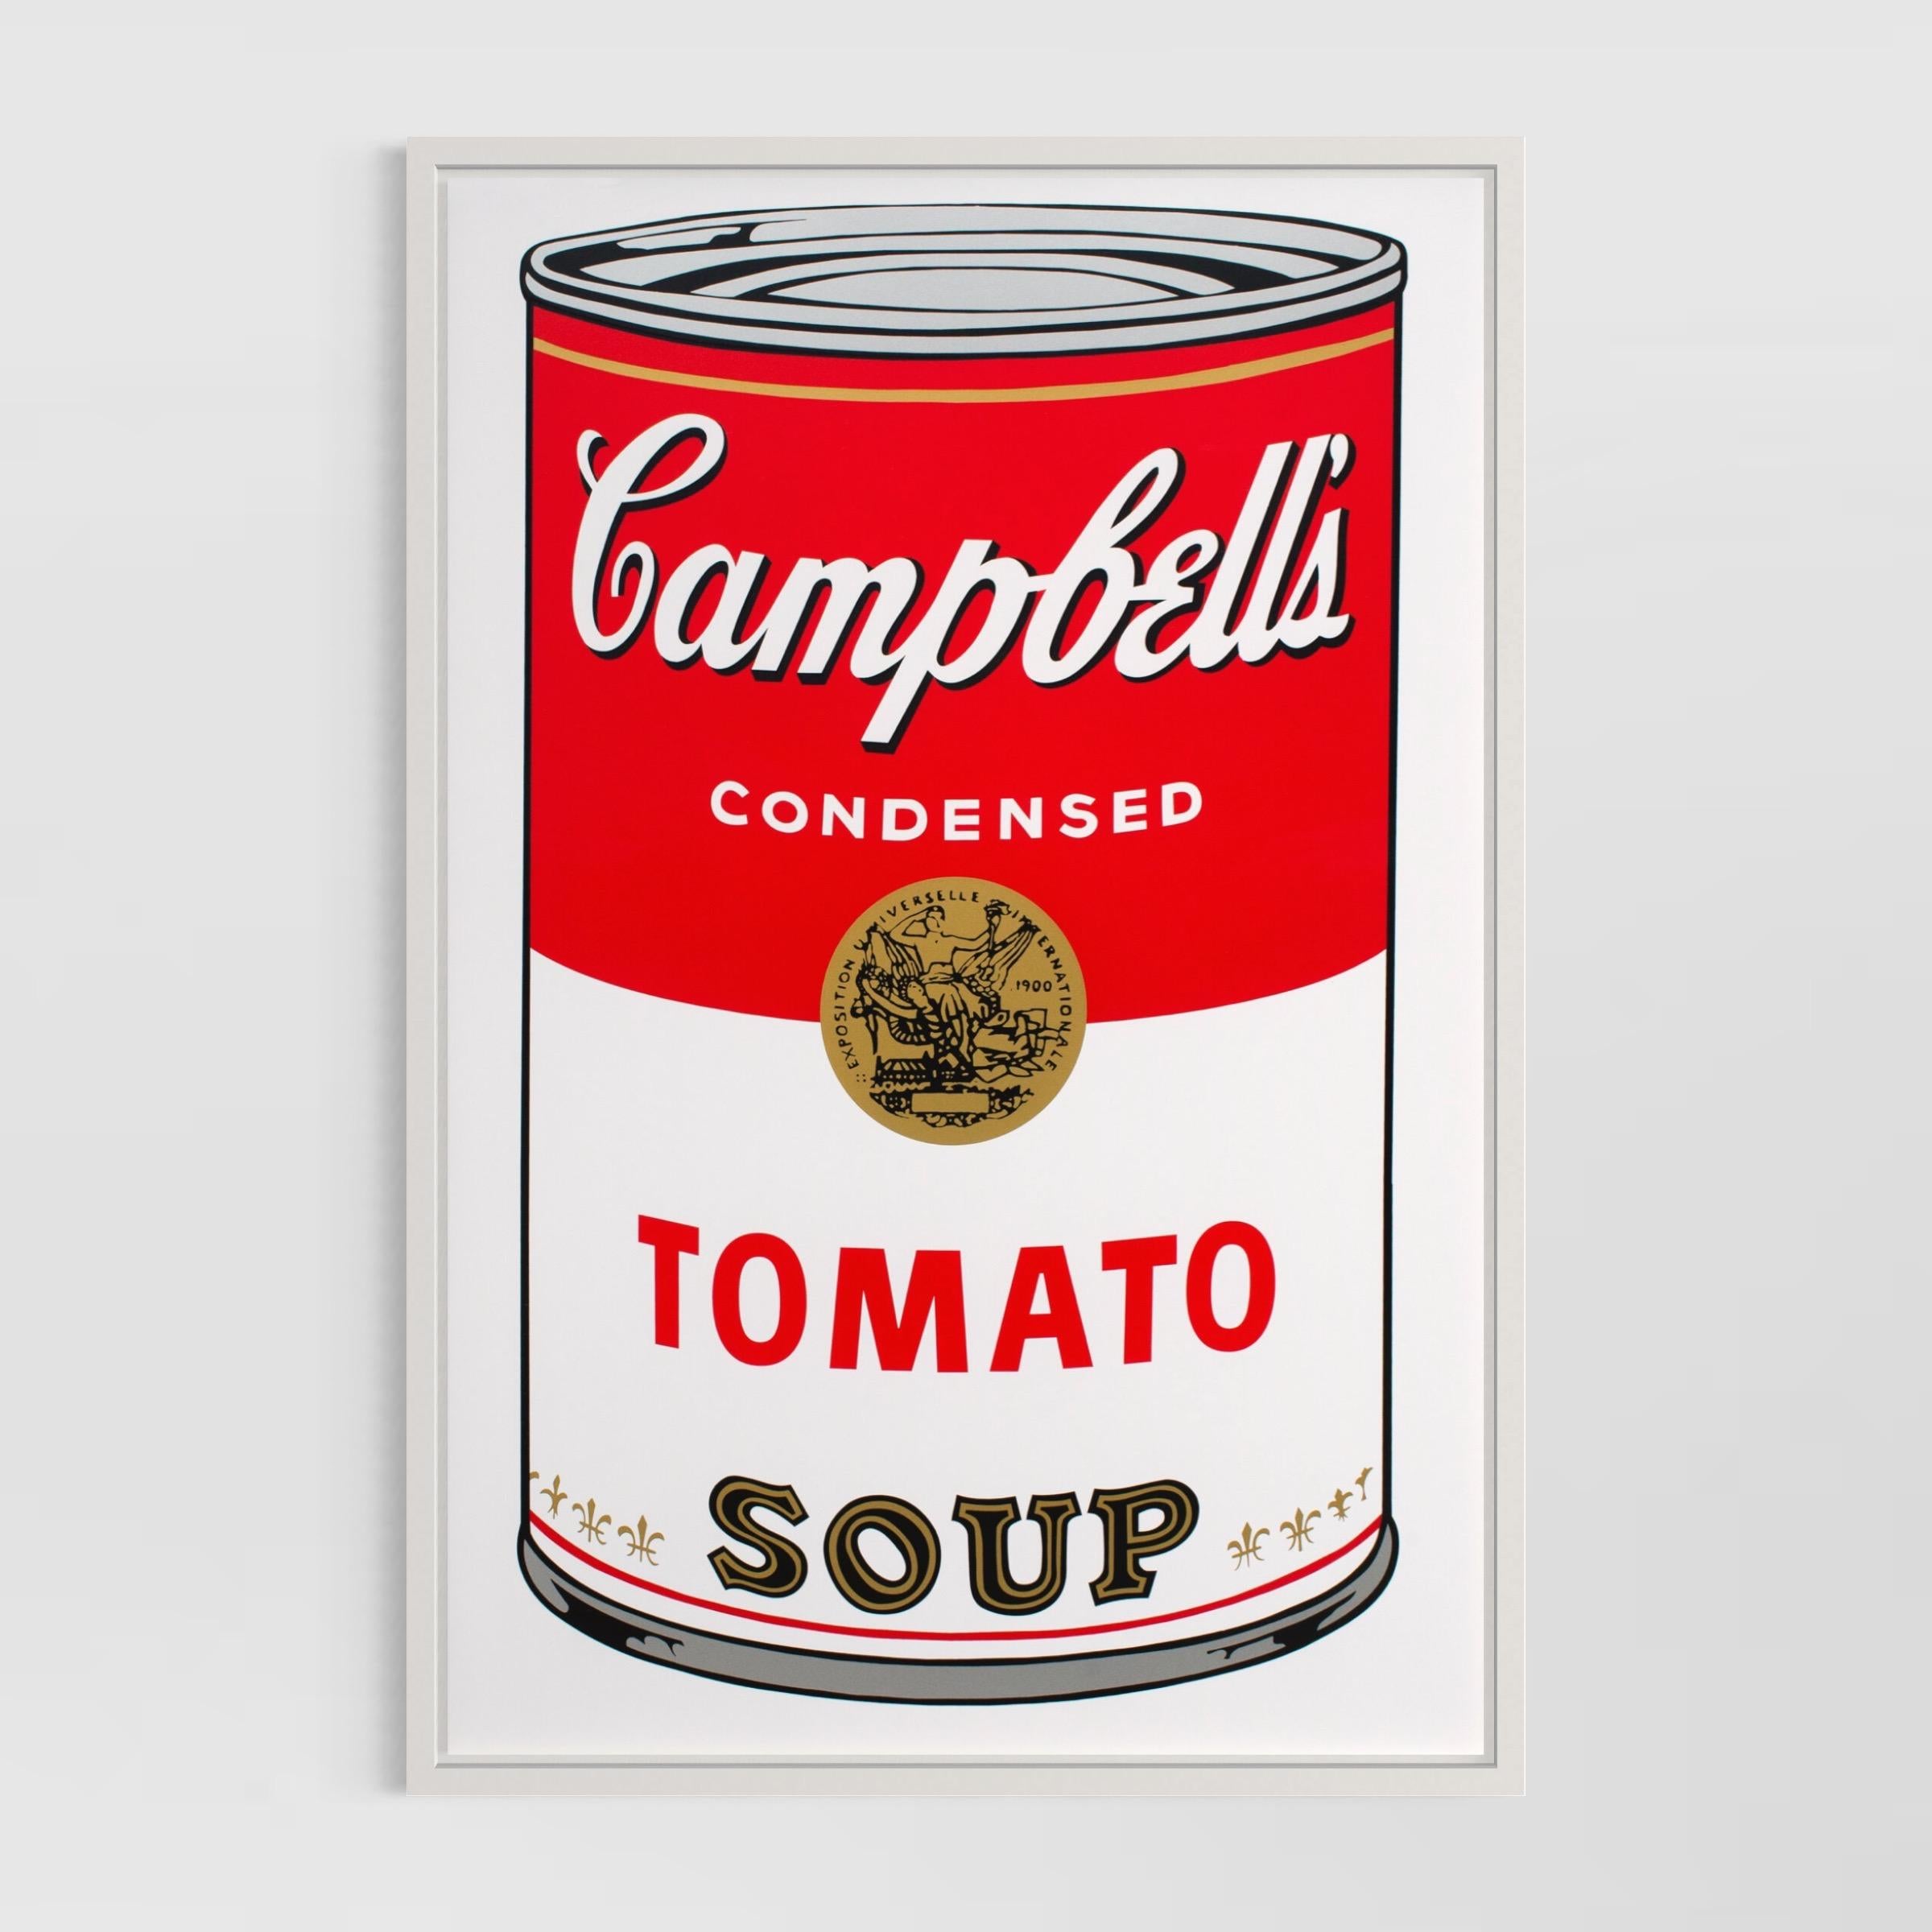 (after) Andy Warhol Figurative Print - Andy Warhol, Campbell Soup -Contemporary Art, Limited Edition, Gift, Pop, Design